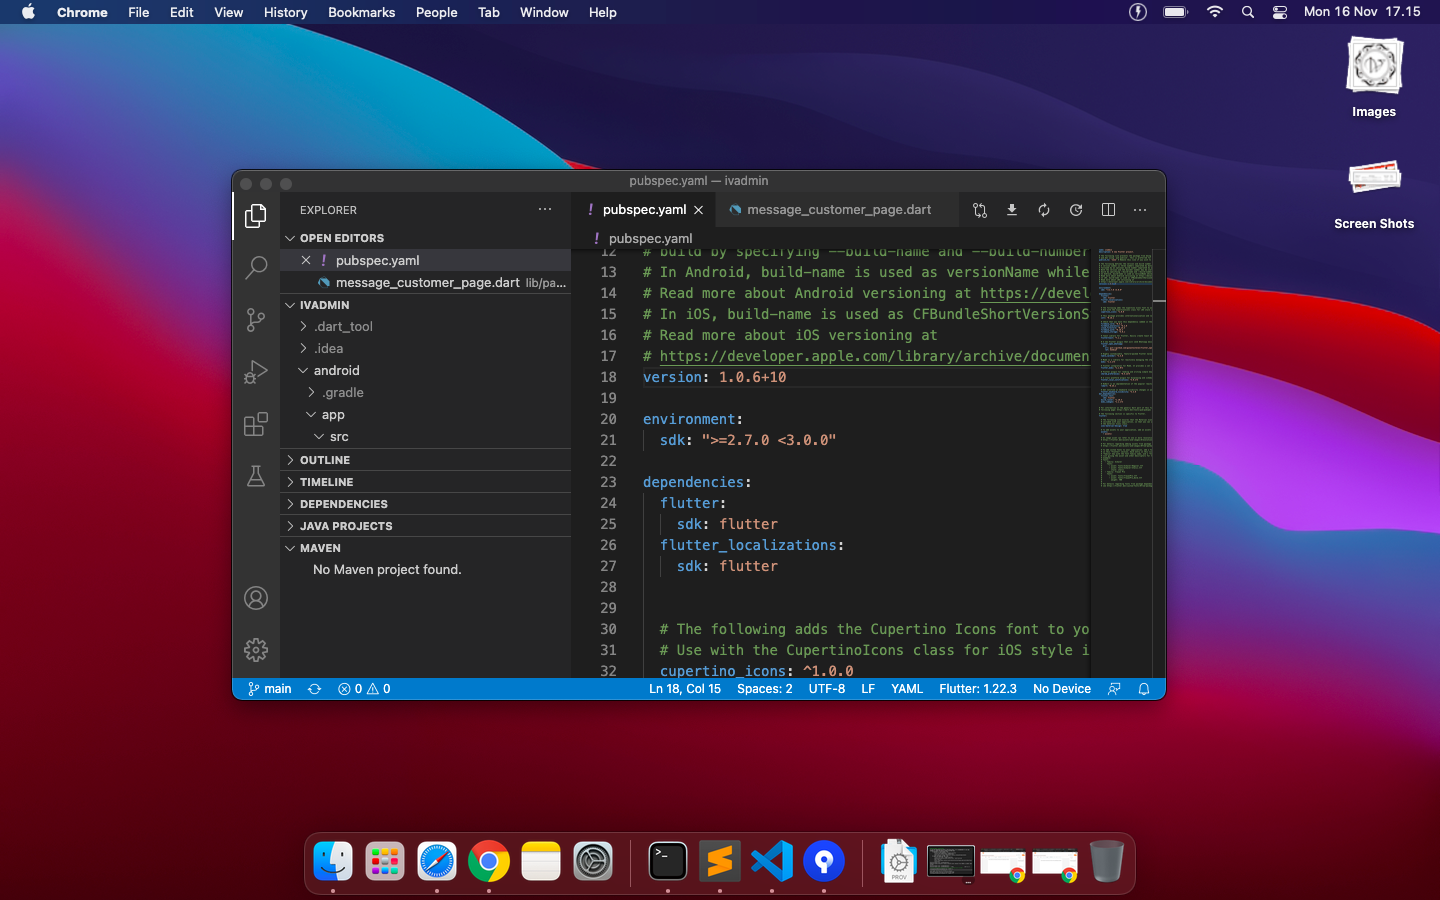 I change IDE Android Studio to Visual Code on Mac Big Sur